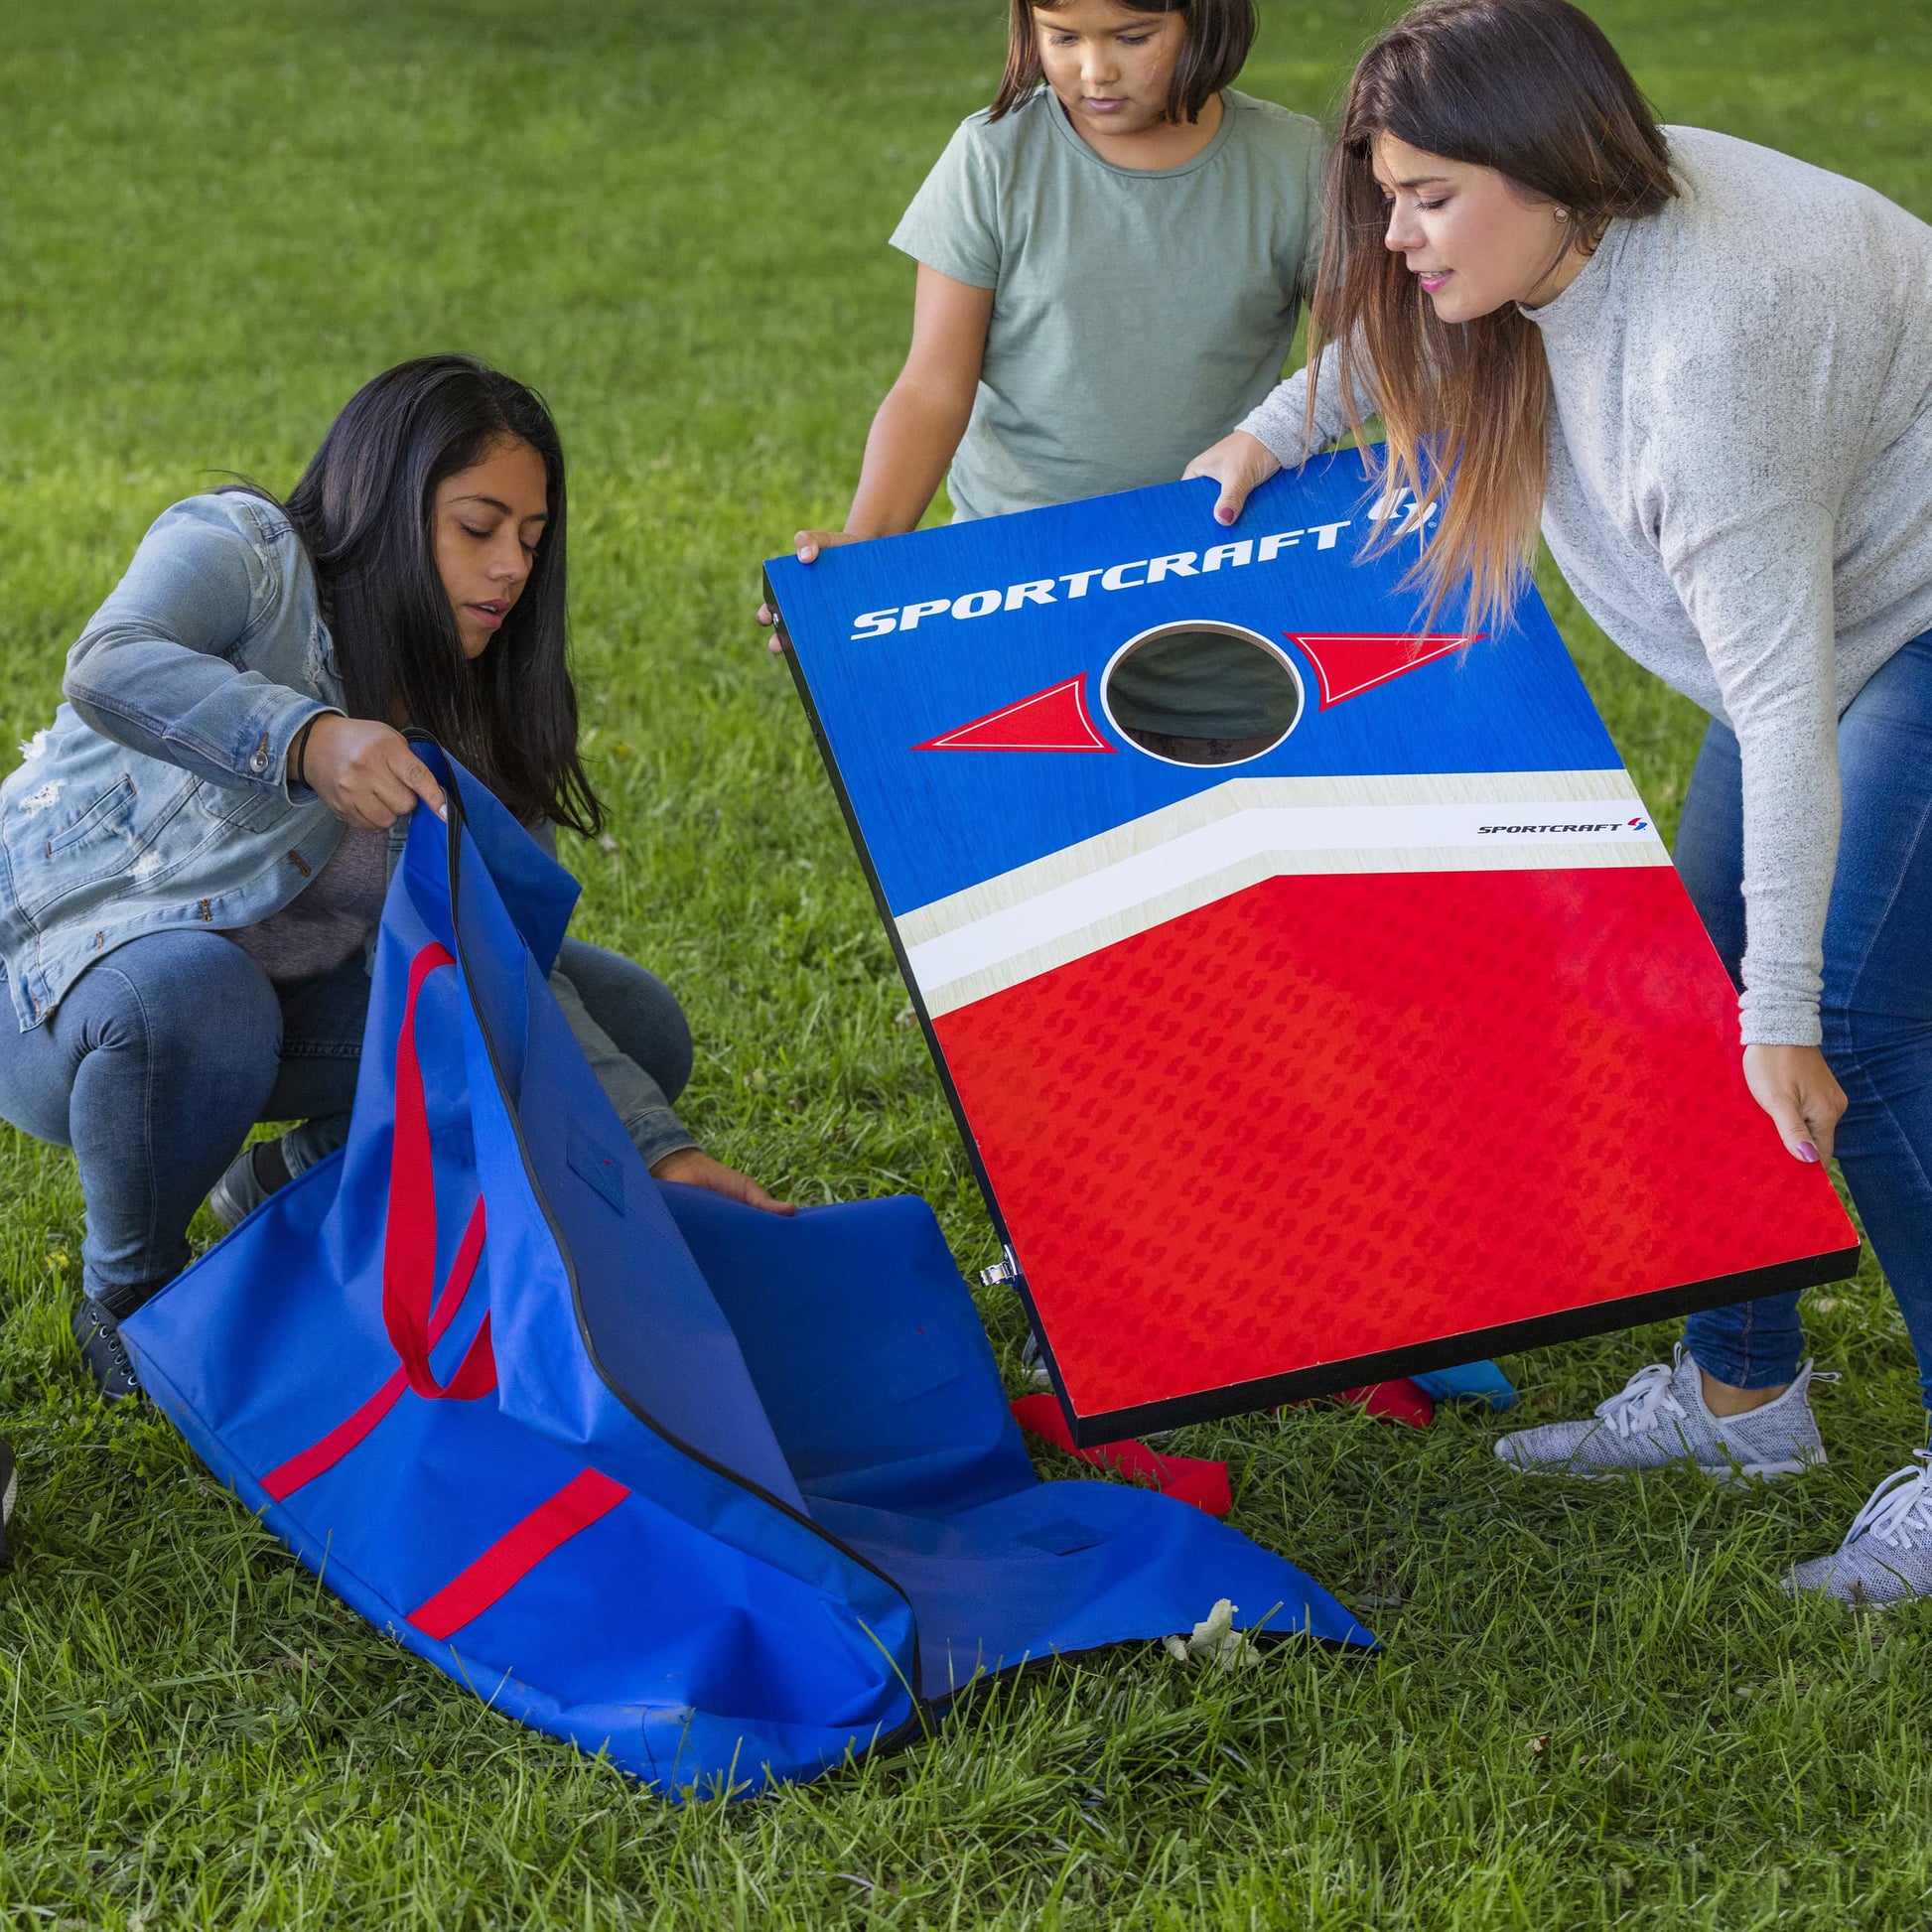 Sportcraft Wooden Corn Hole Bean Bag Toss Lifestyle Image, Family putting boards into storage bag